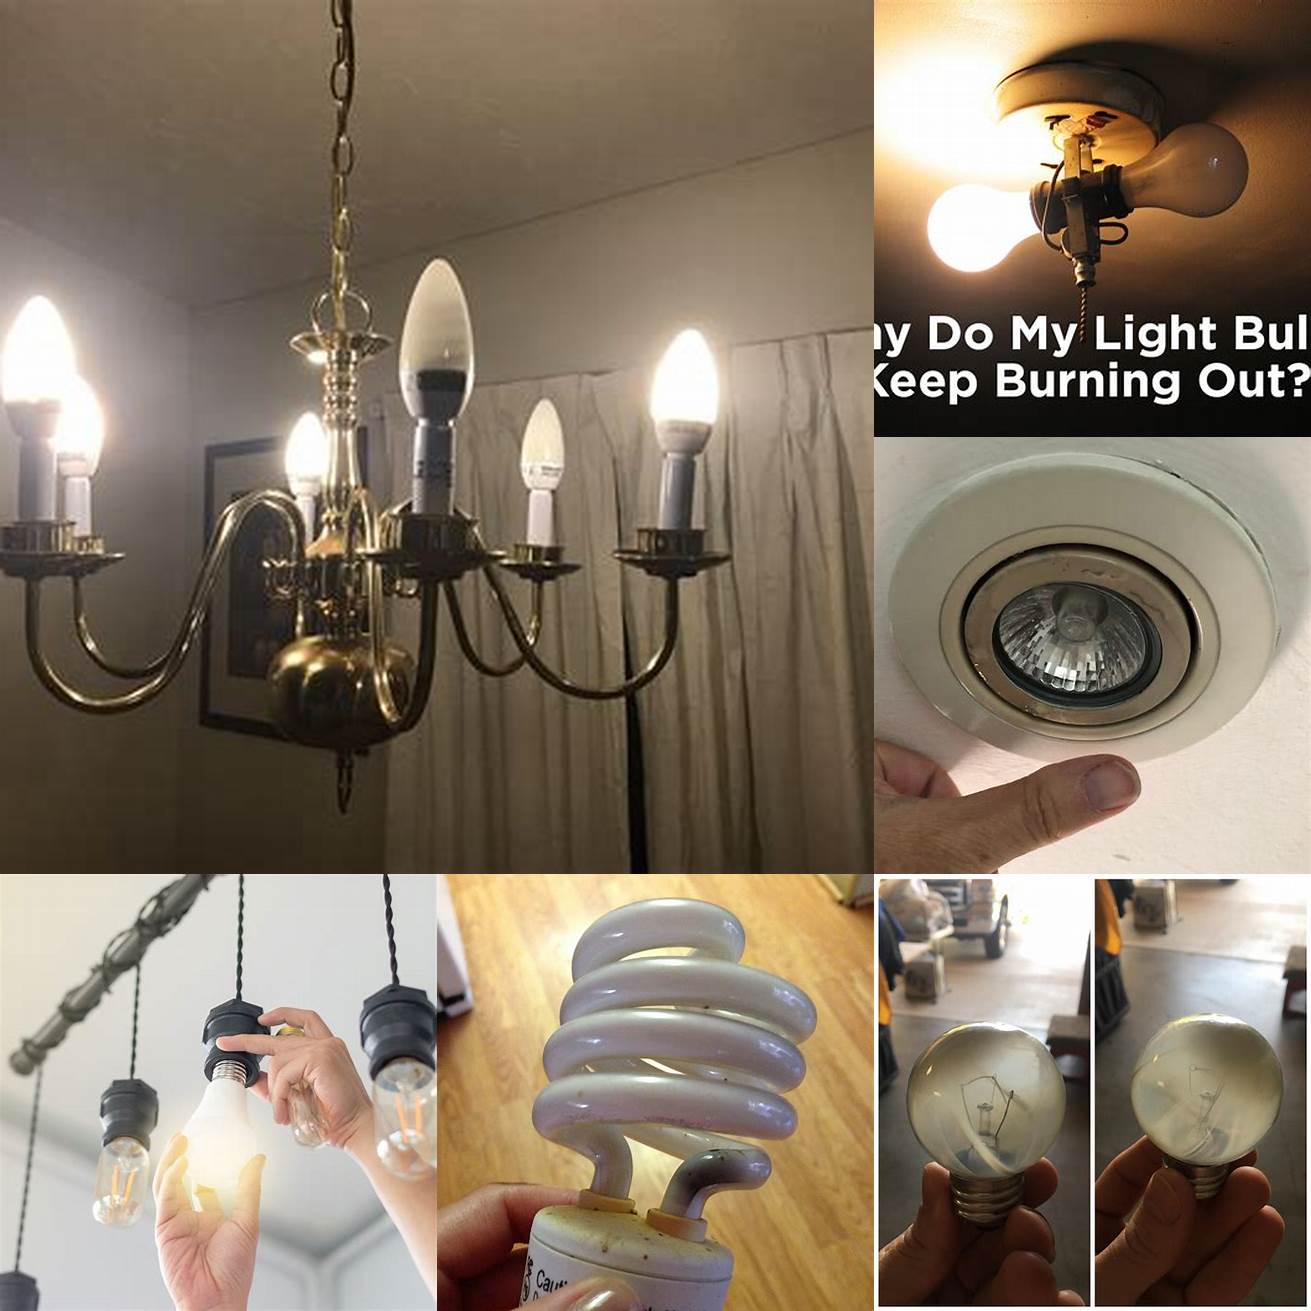 2 Replace burned-out bulbs promptly